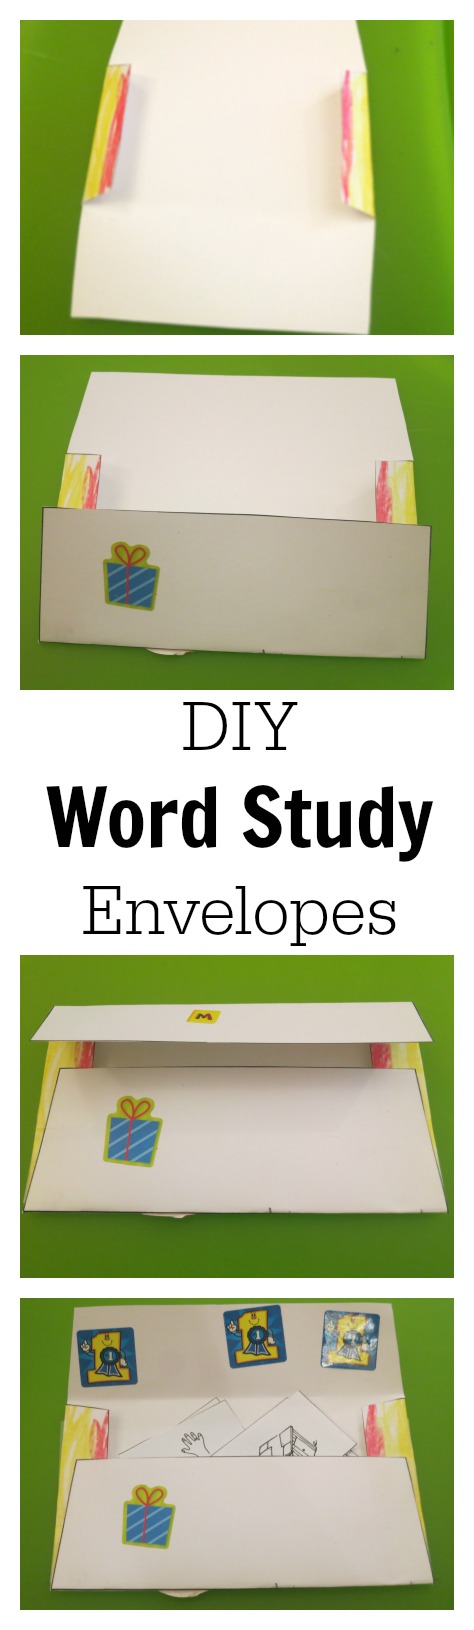 DIY Word Study Envelopes for Organization of Words-Pictures